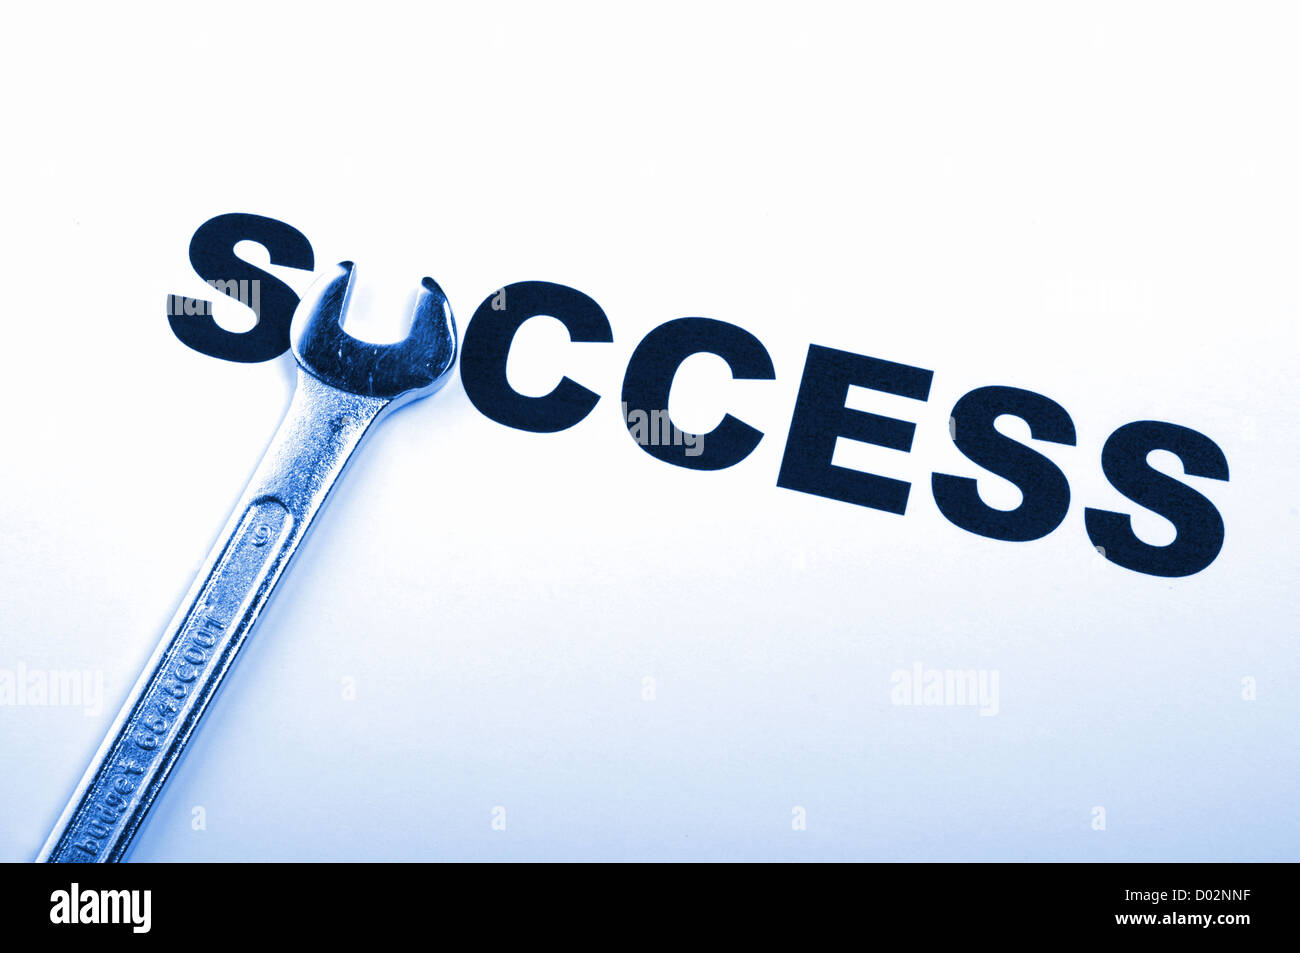 success concept with word and tool showing business growth Stock Photo